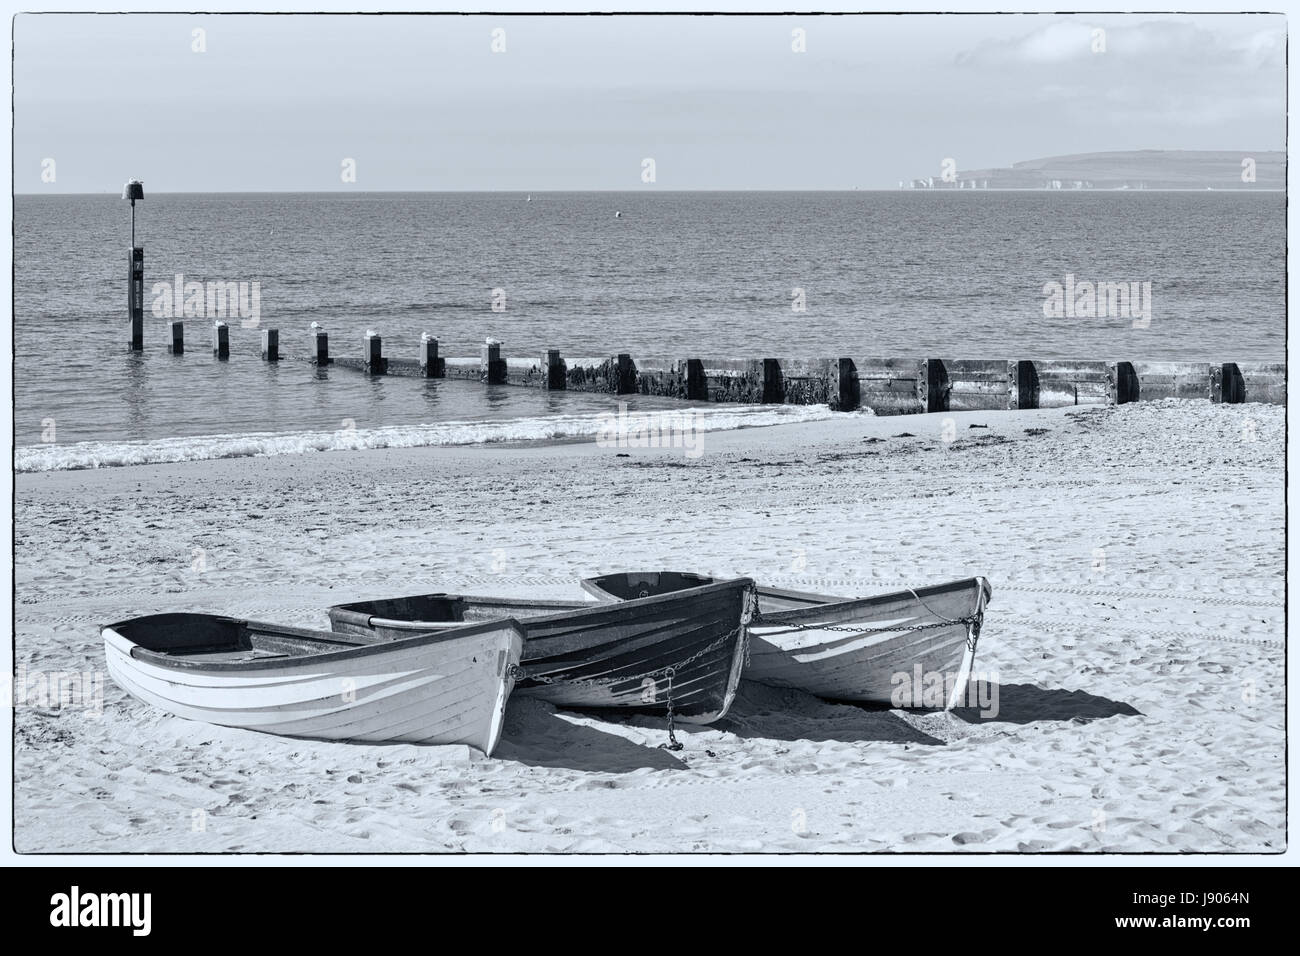 Fishing boats on sand at Durley Chine beach, Bournemouth, Dorset in May - fine art monochrome black and white Stock Photo